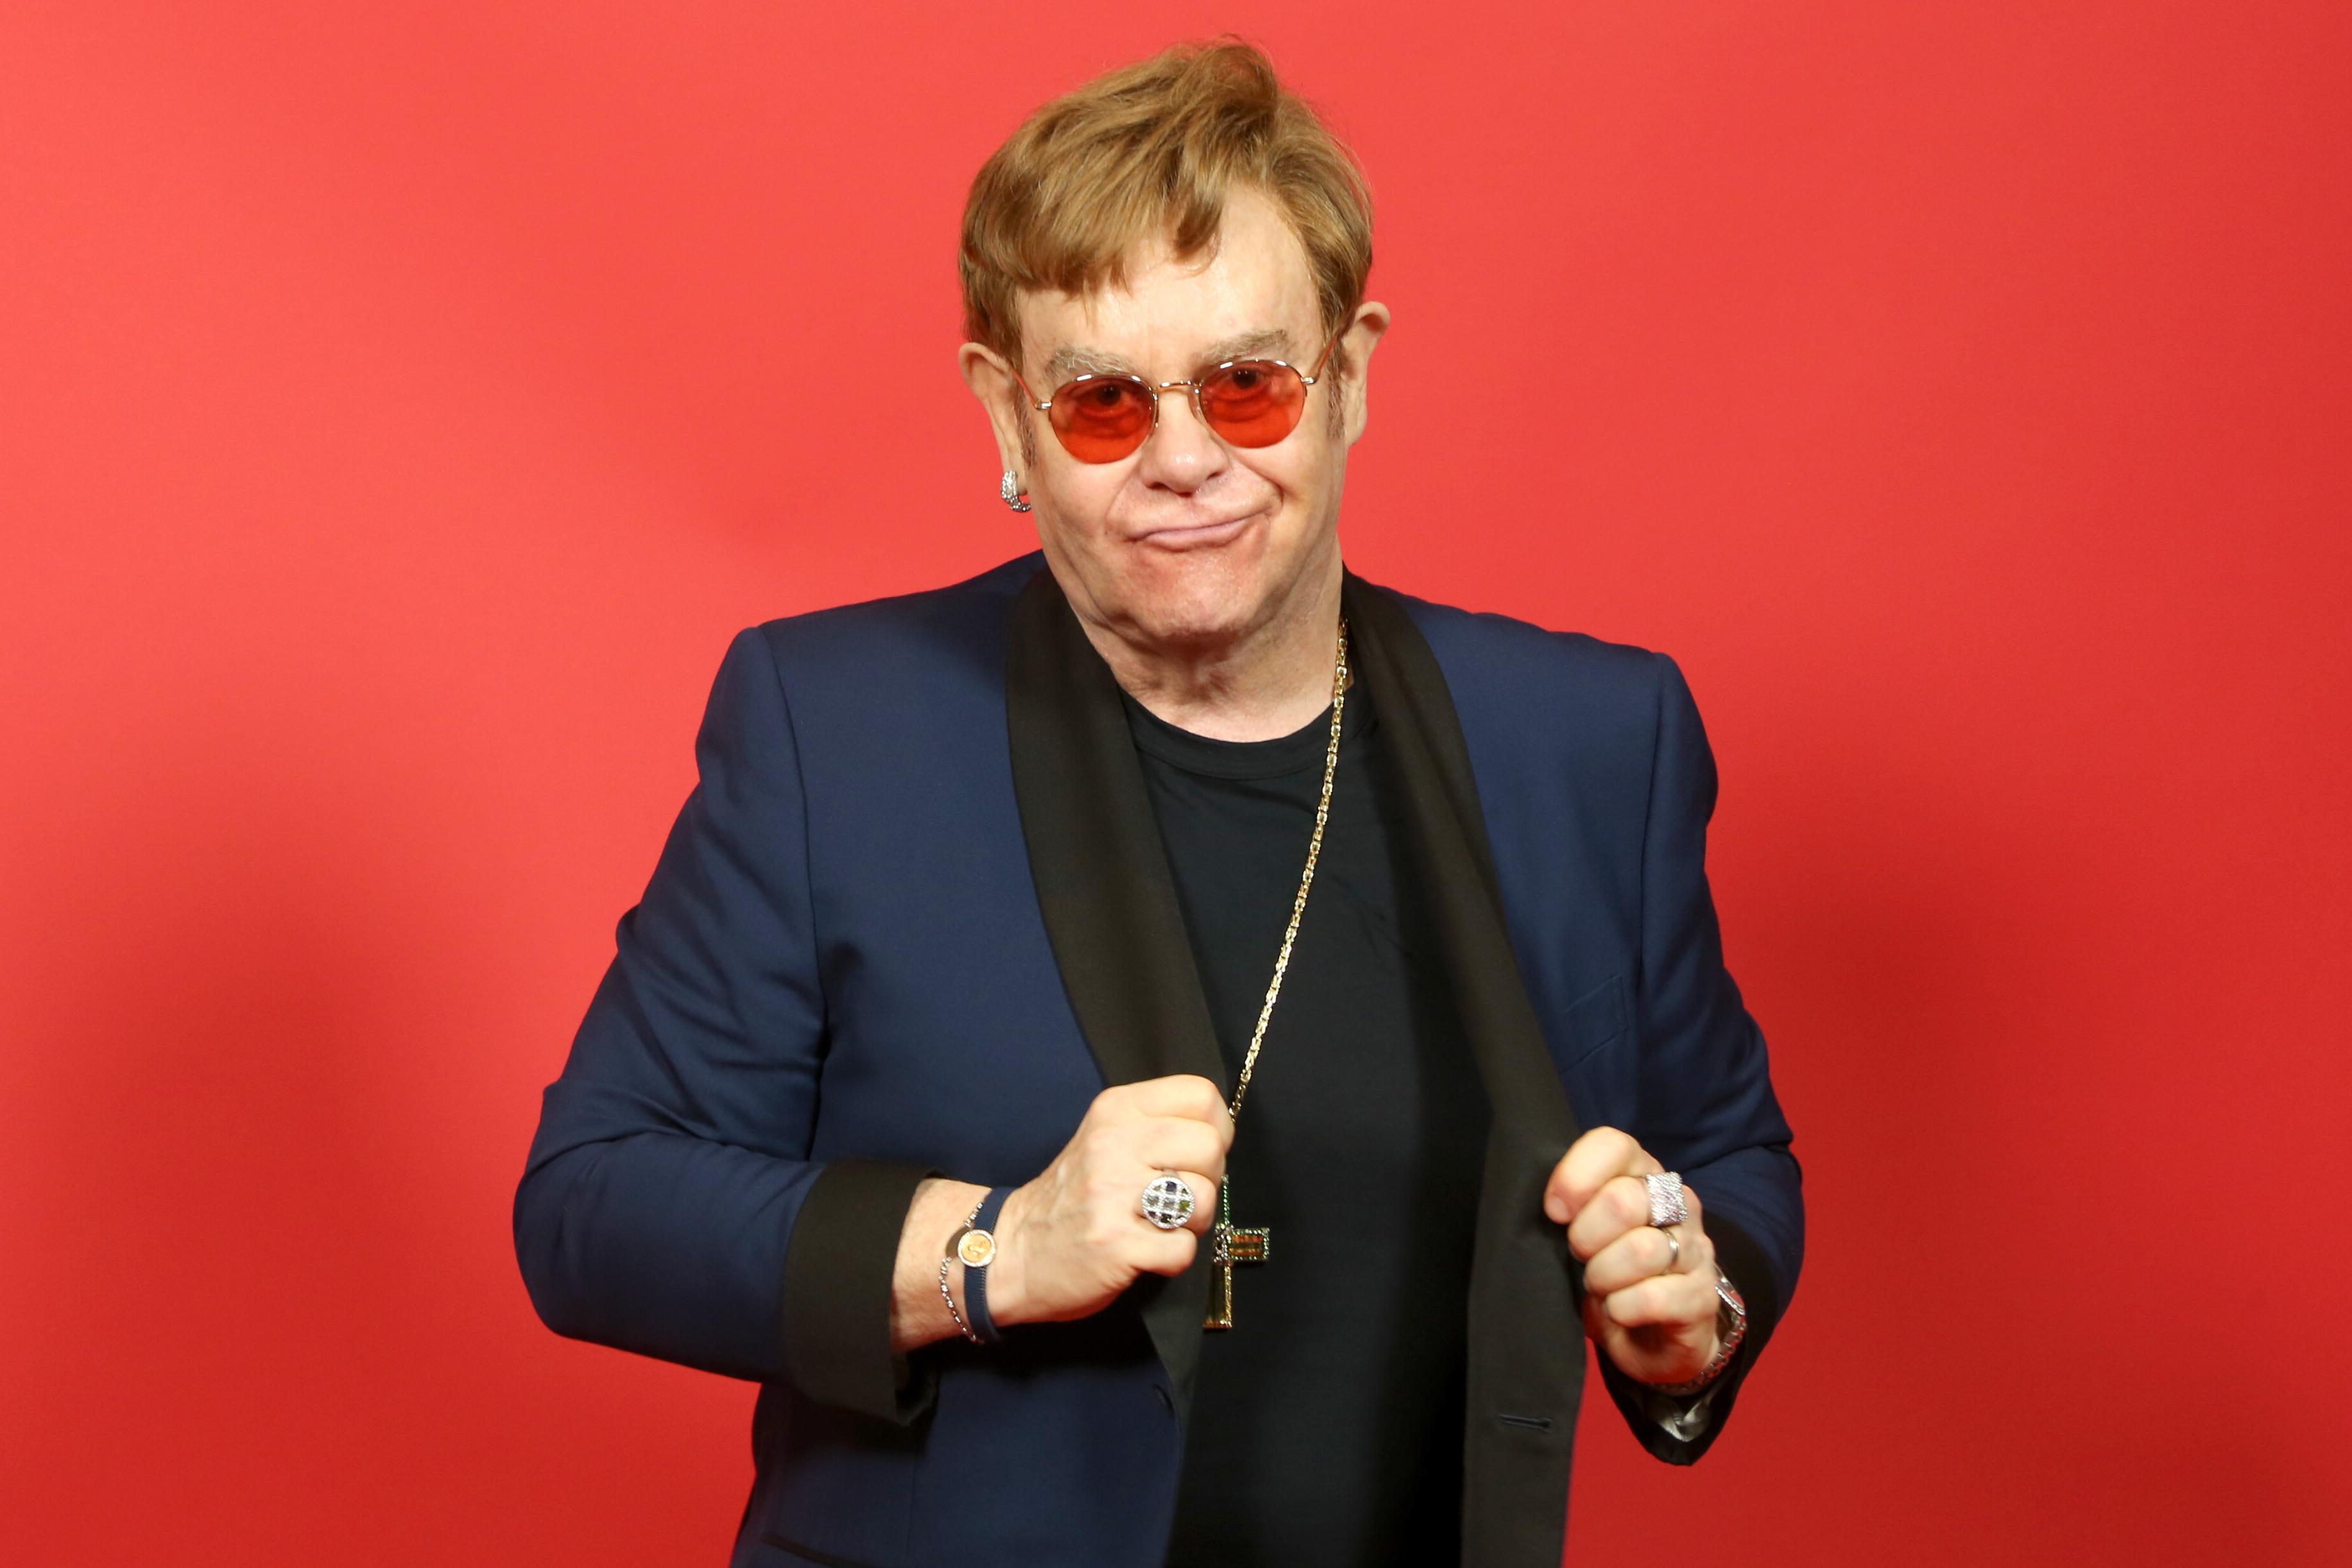 12 Facts About Elton John - Facts.net